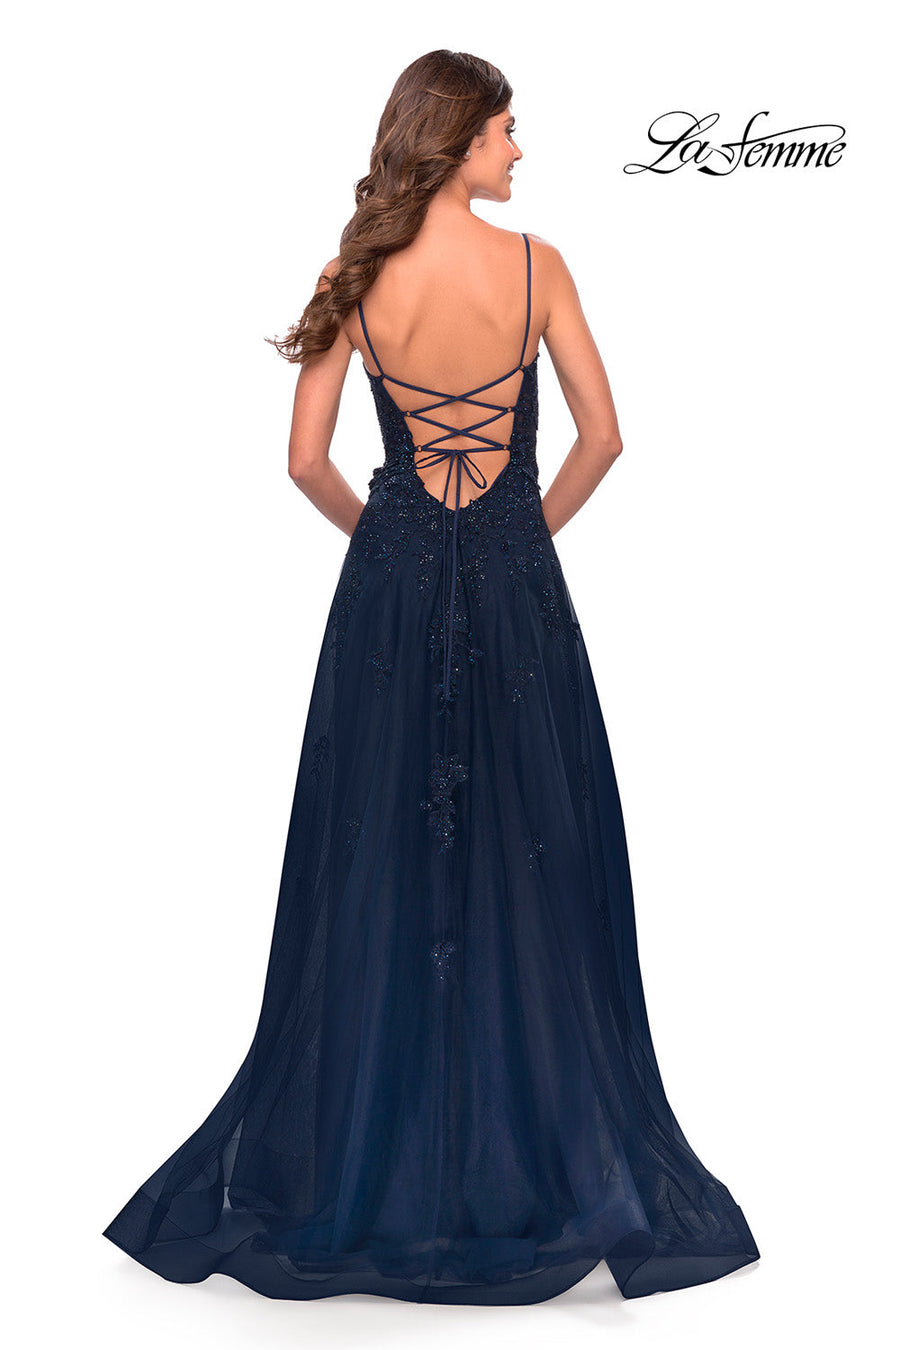 La Femme 31381 prom dress images.  La Femme 31381 is available in these colors: Navy, Red.